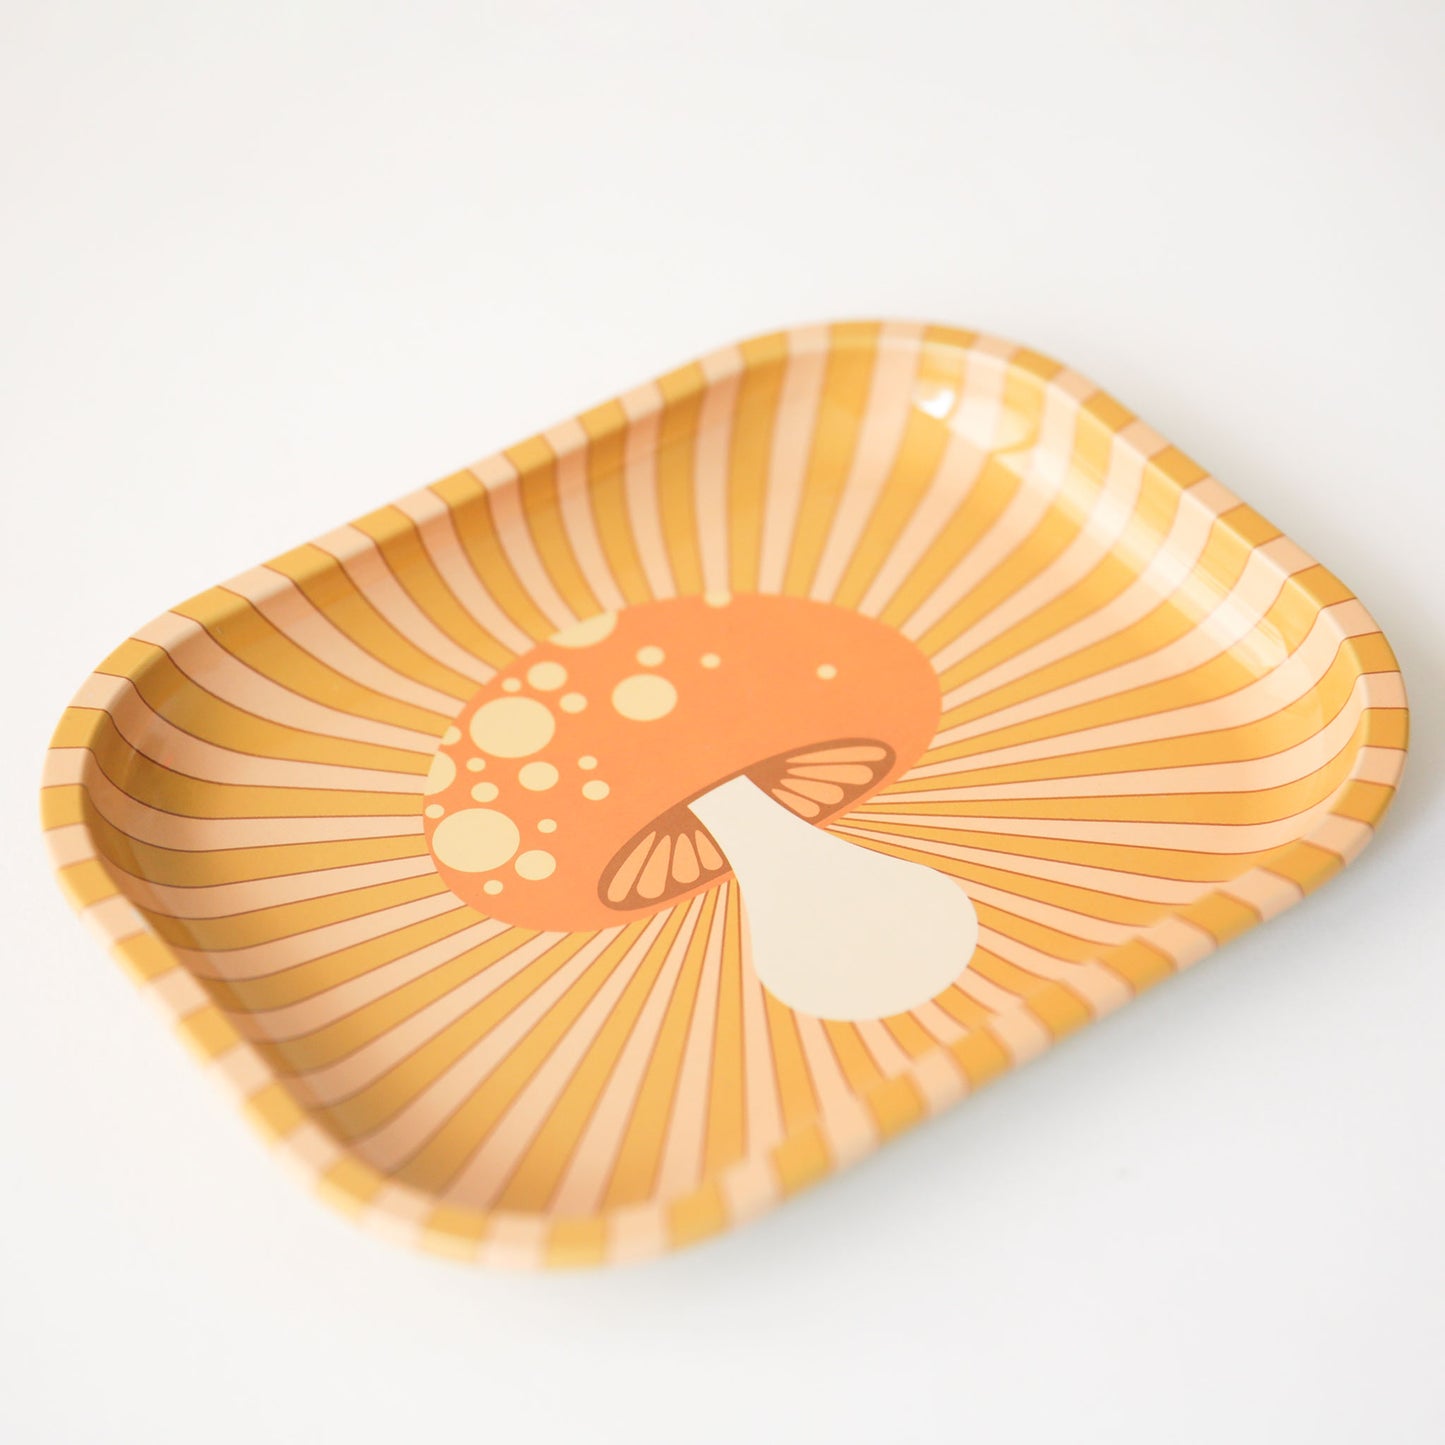 An orange and light pink metal tray with a groovy mushroom graphic in the center.